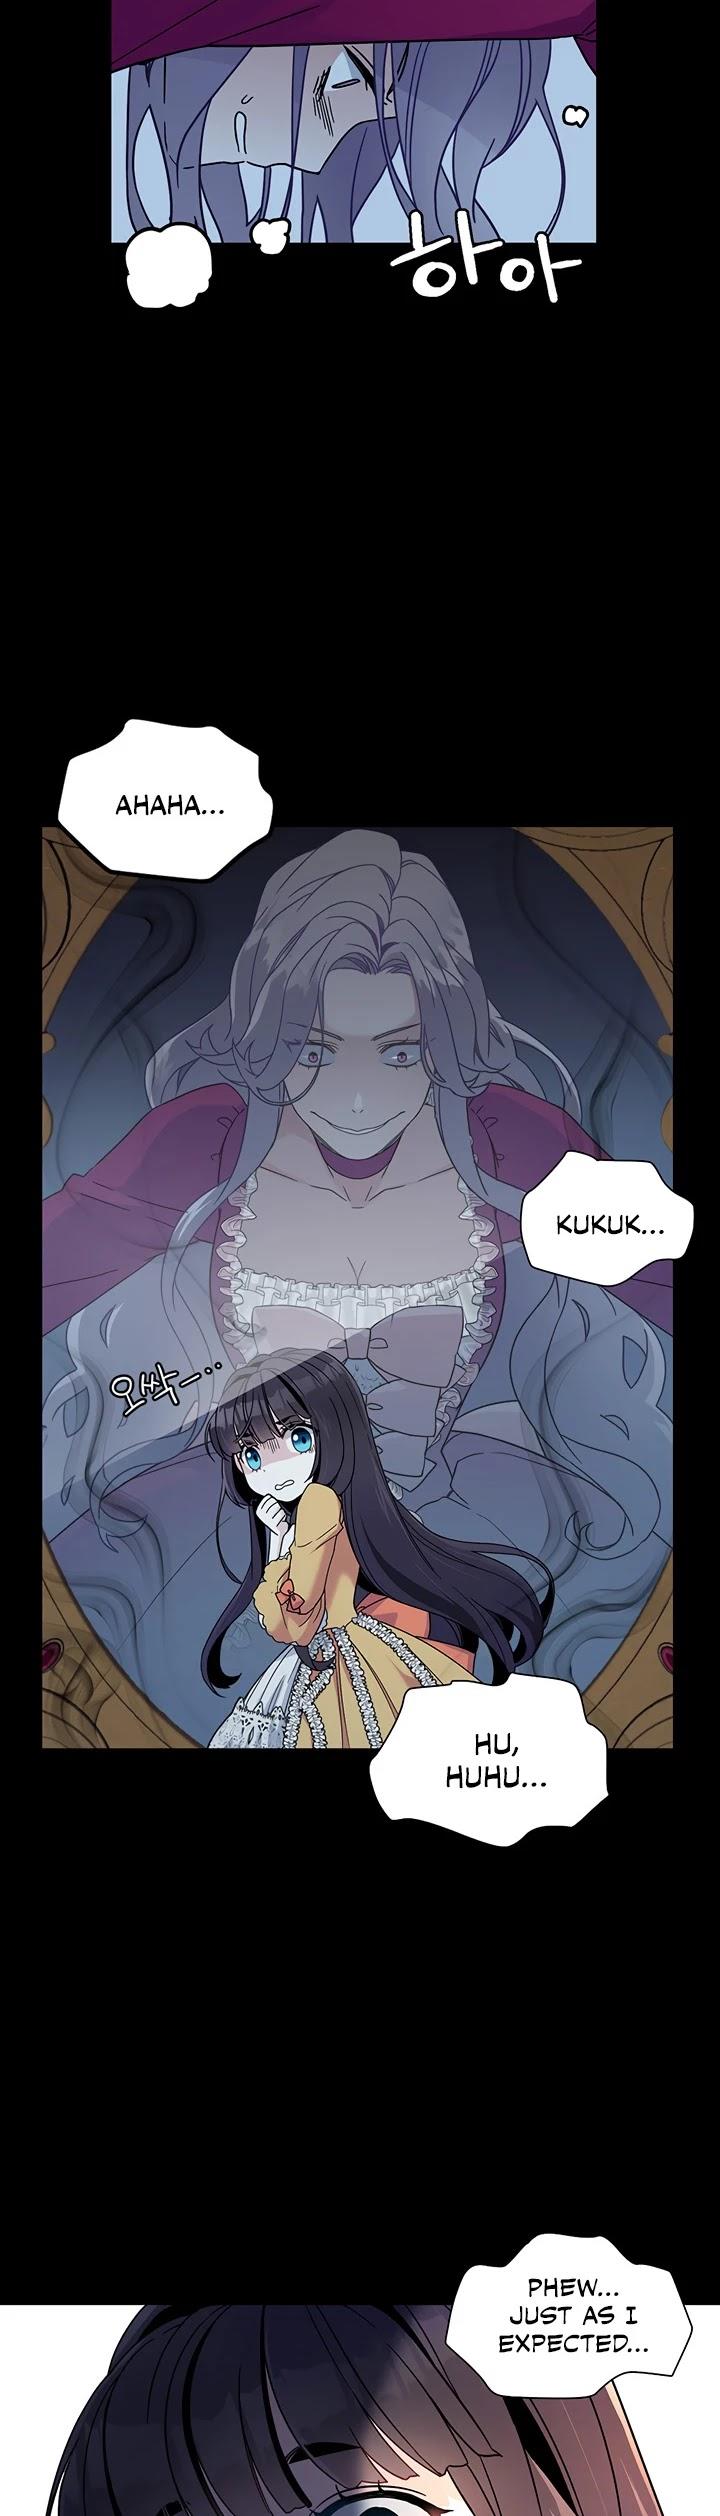 I’M The Stepmother, But My Daughter Is Too Cute Chapter 1 page 8 - Mangakakalots.com